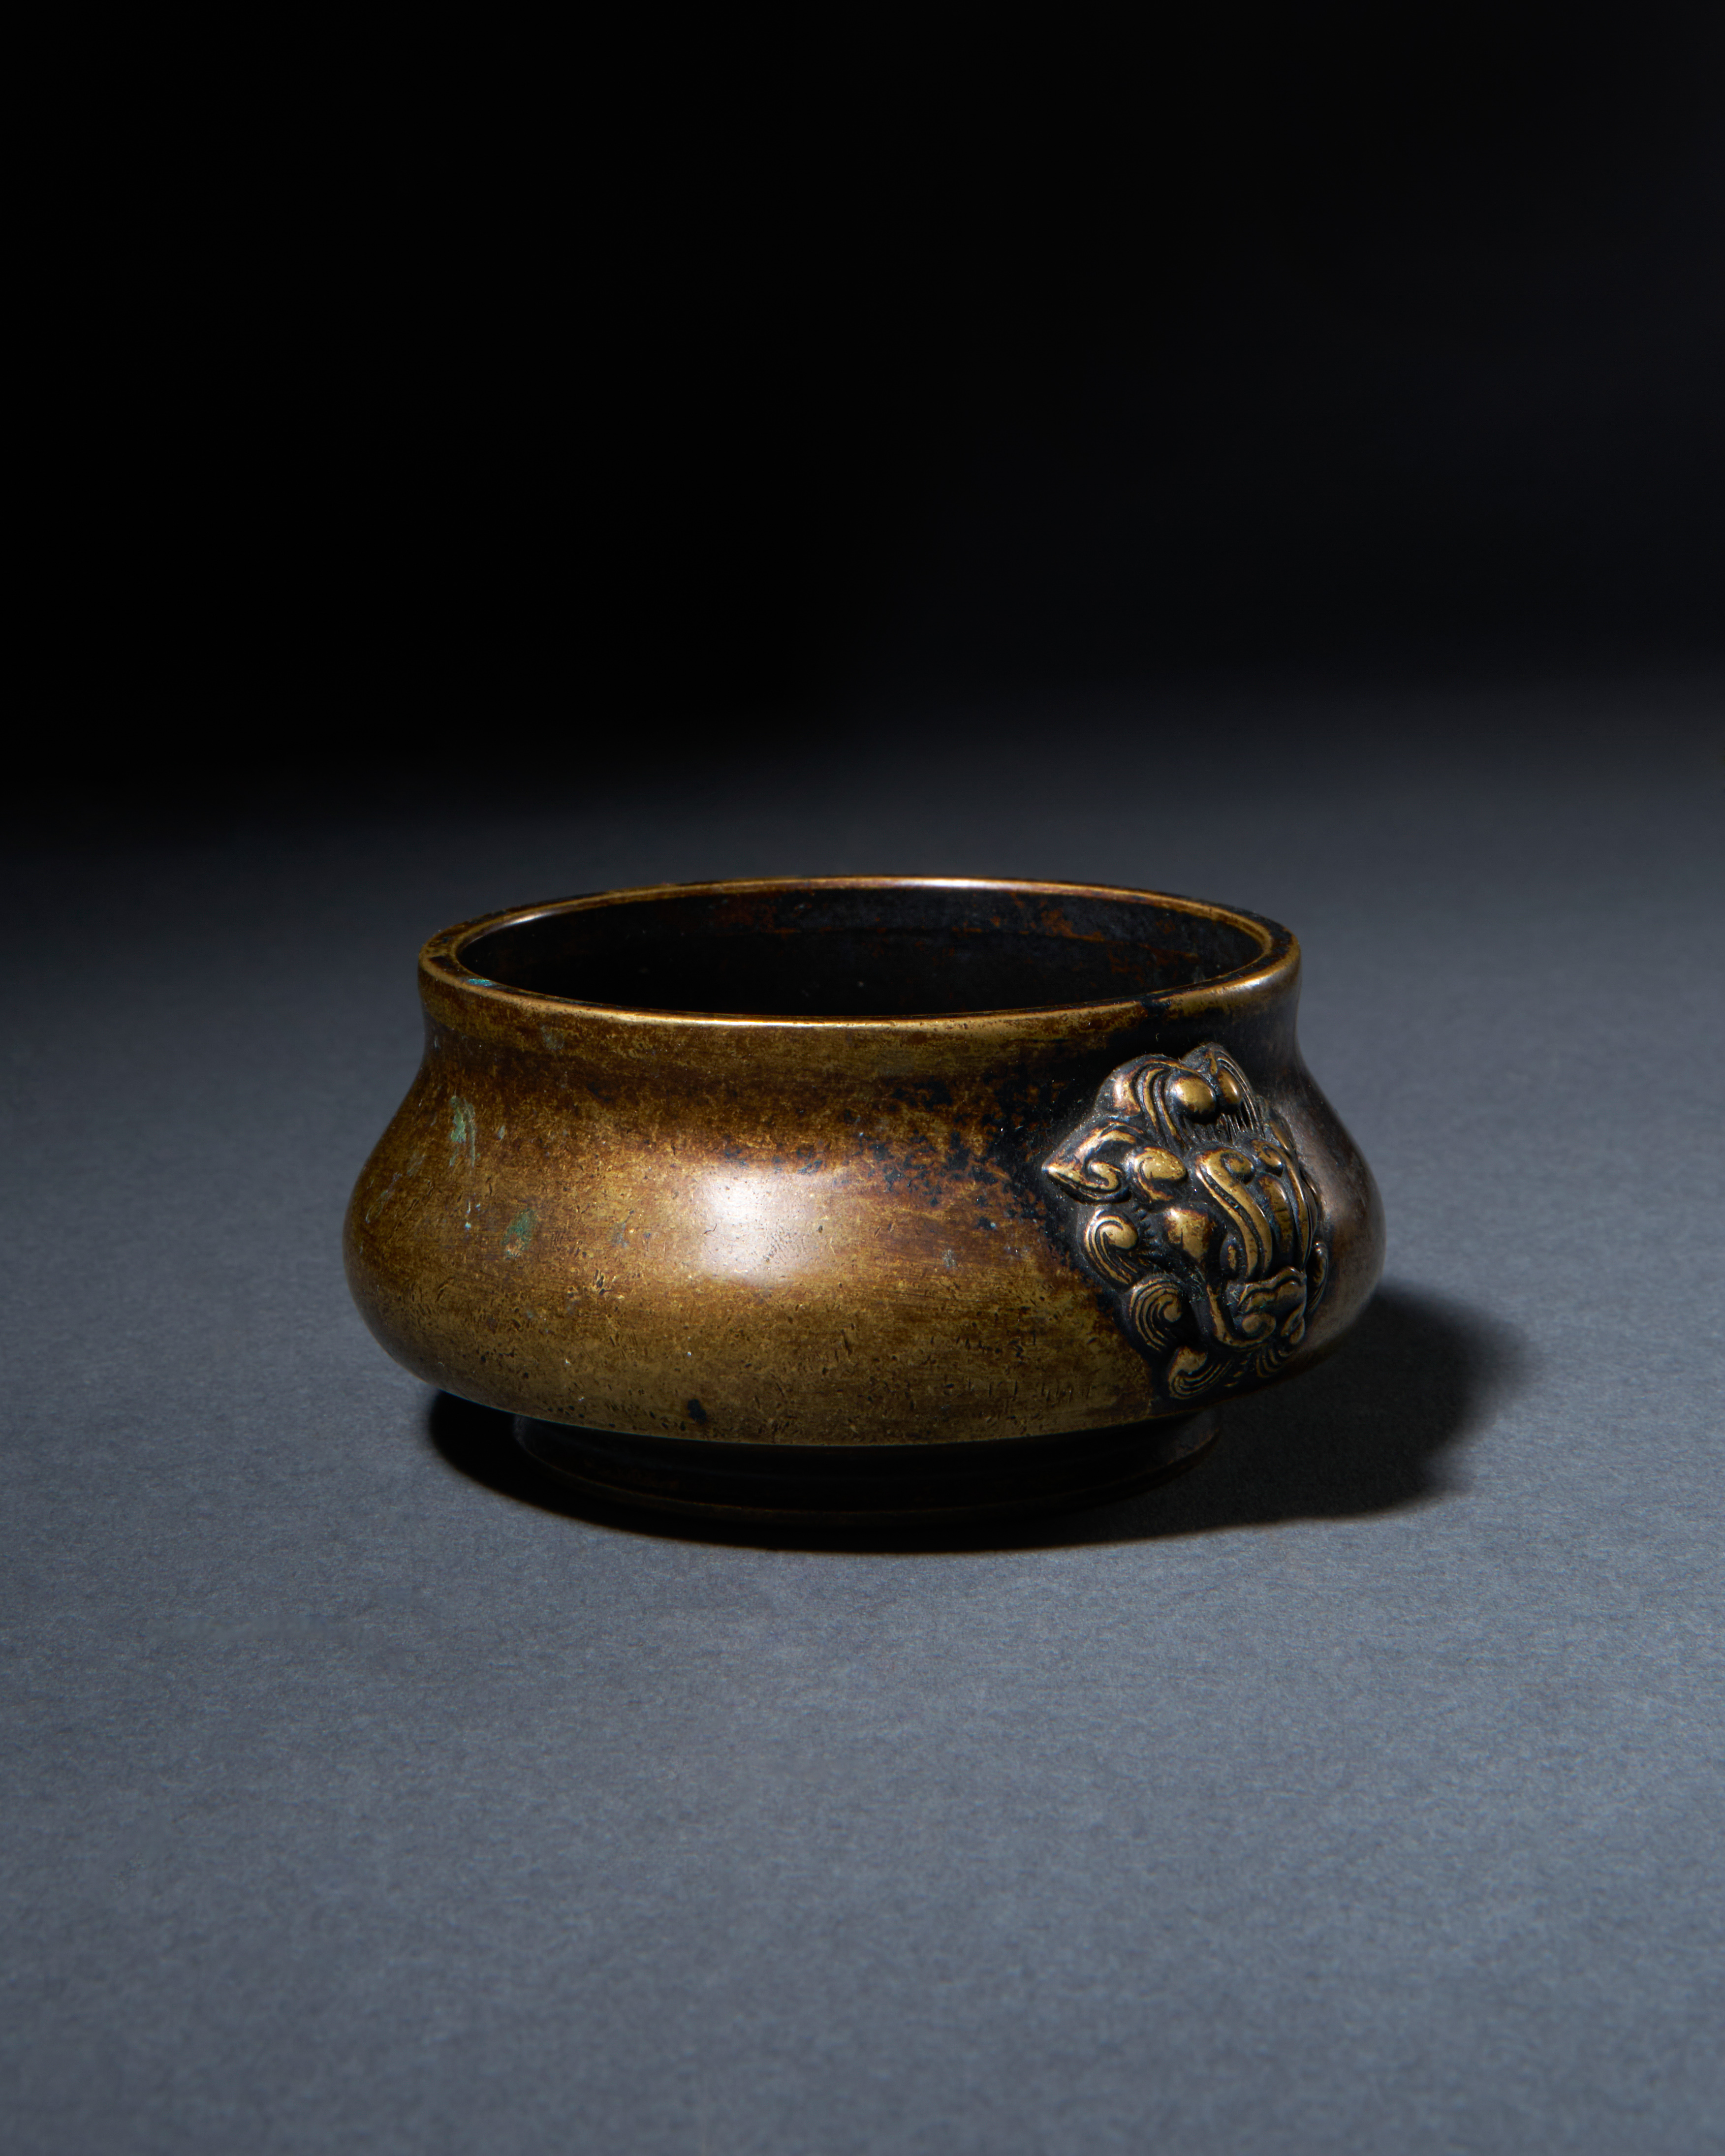 A CHINESE BRONZE TRIPOD CENSER, QING DYNASTY (1644-1911) - Image 2 of 5